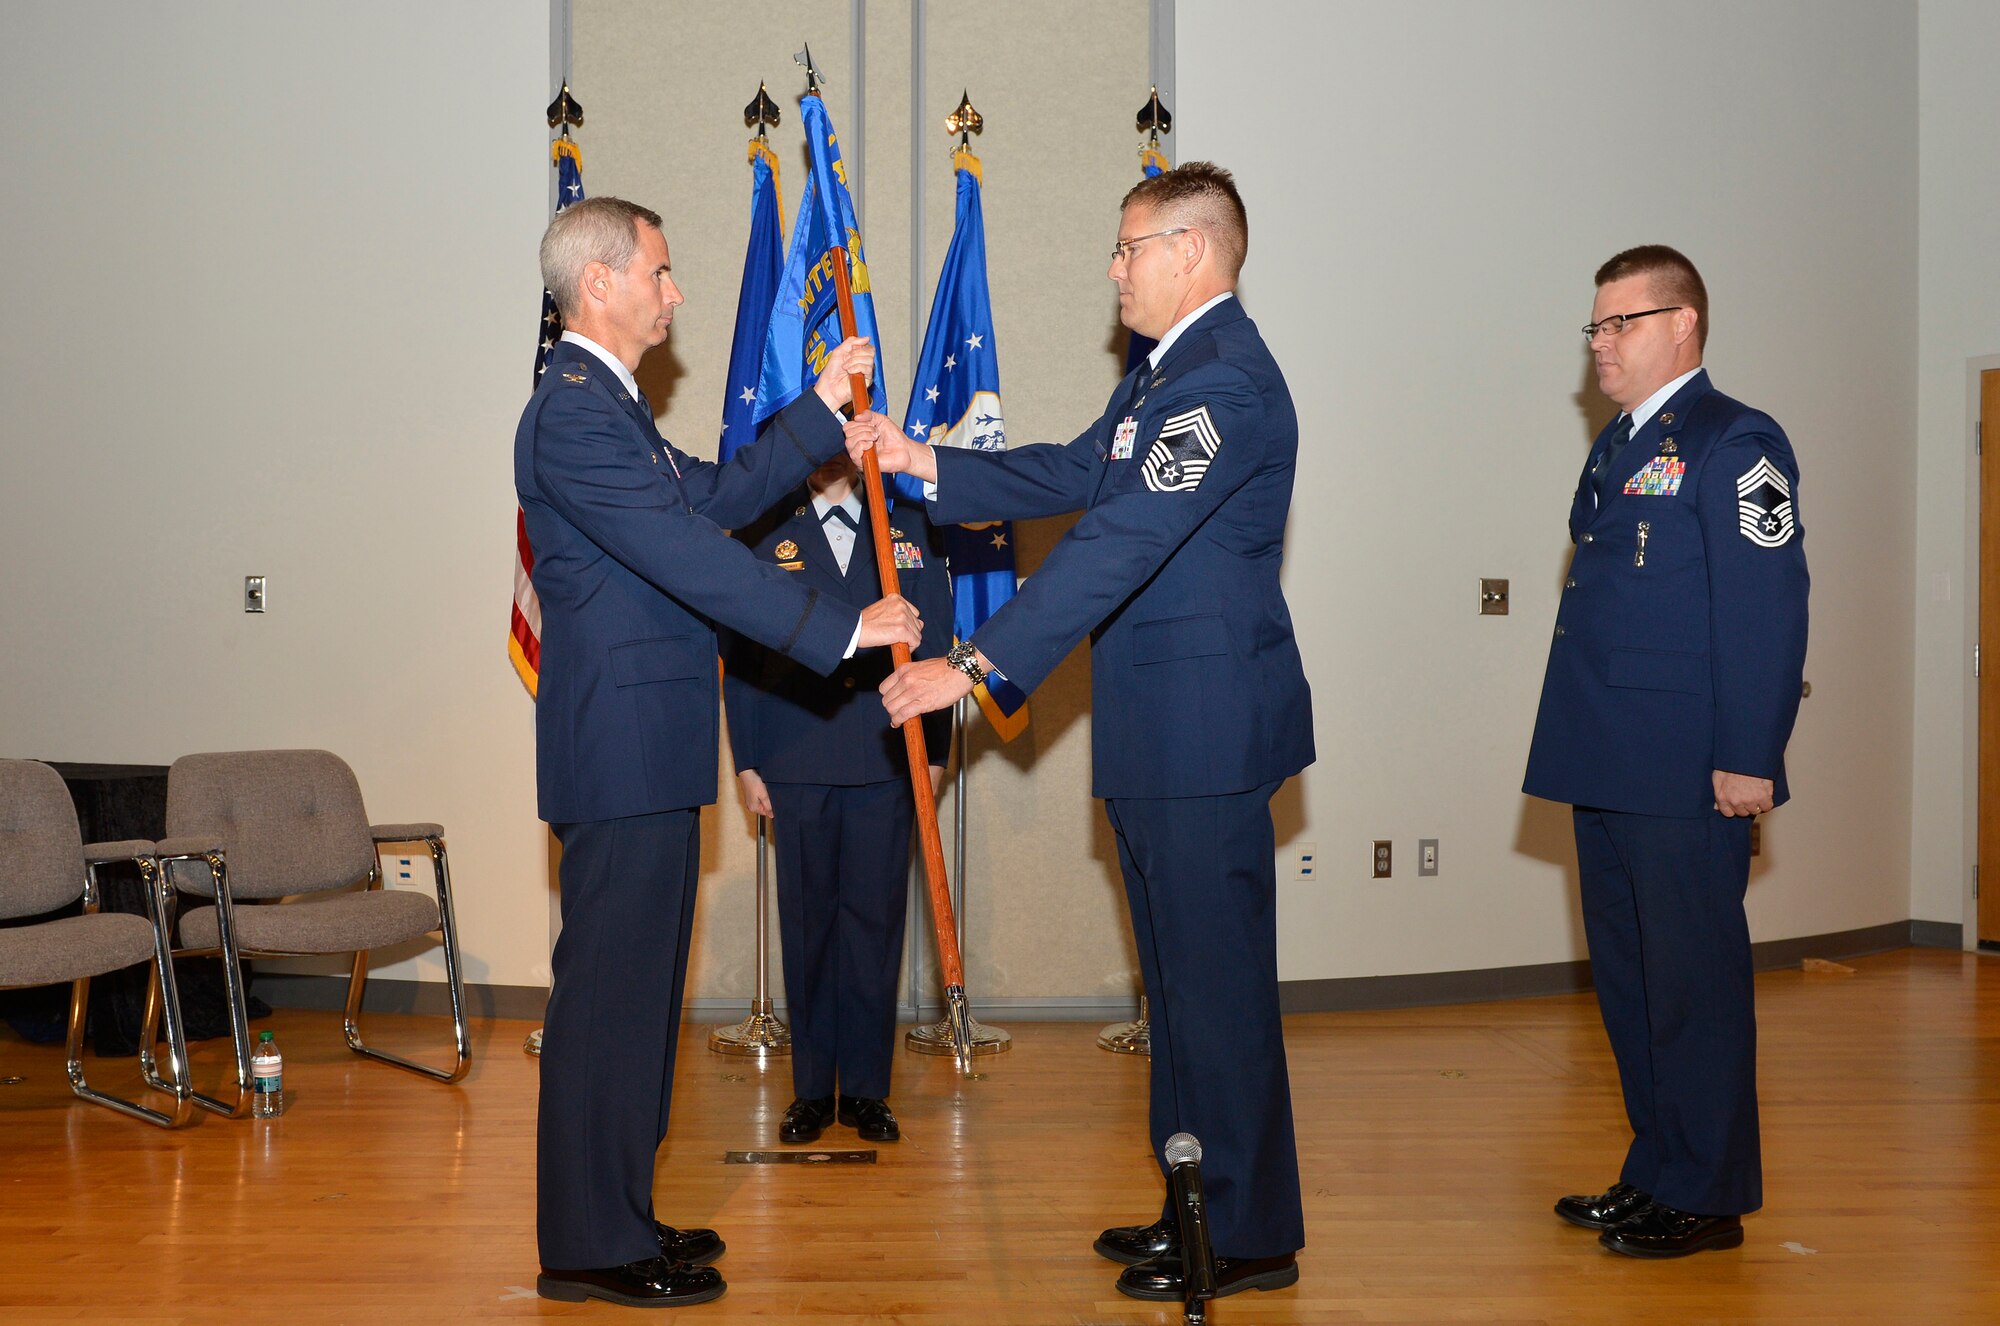 Col. Timothy Cathcart, commander of the I.G. Brown Training and Education Center (TEC), hands the guidon to Chief Master Sgt. Thomas K. Stoudt, who takes charge as the 13th commandant of the Paul H. Lankford Enlisted Professional Military Education Center here during a change of commandant ceremony Oct. 17 on the TEC campus at Spruance Hall. (U.S. Air National Guard photo by Master Sgt. Kurt Skoglund/Released)